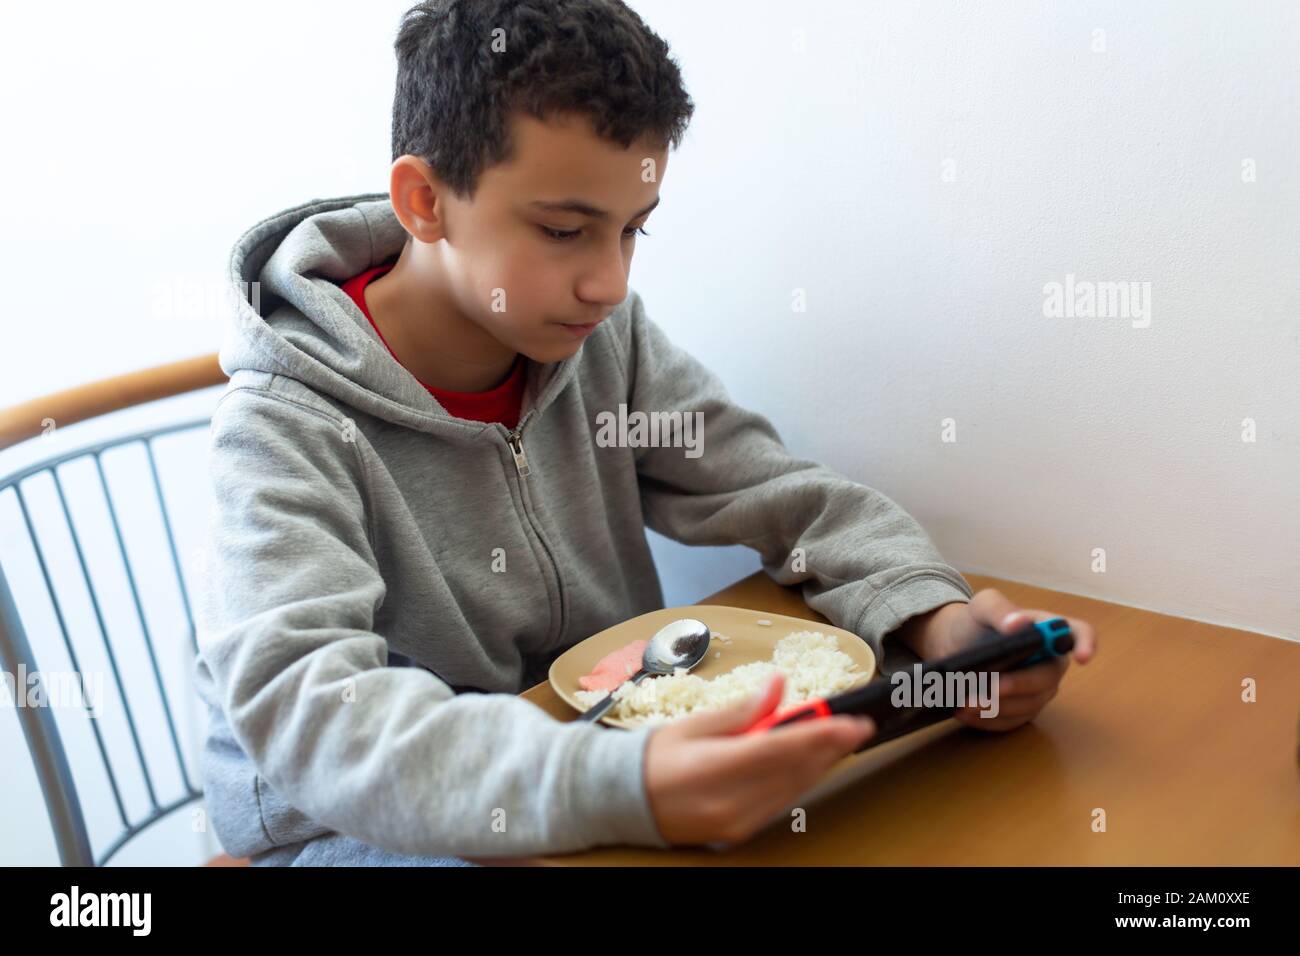 boy eats poorly distracted by the game. Kid eating rice and surfing on internet or playing video games on console Stock Photo